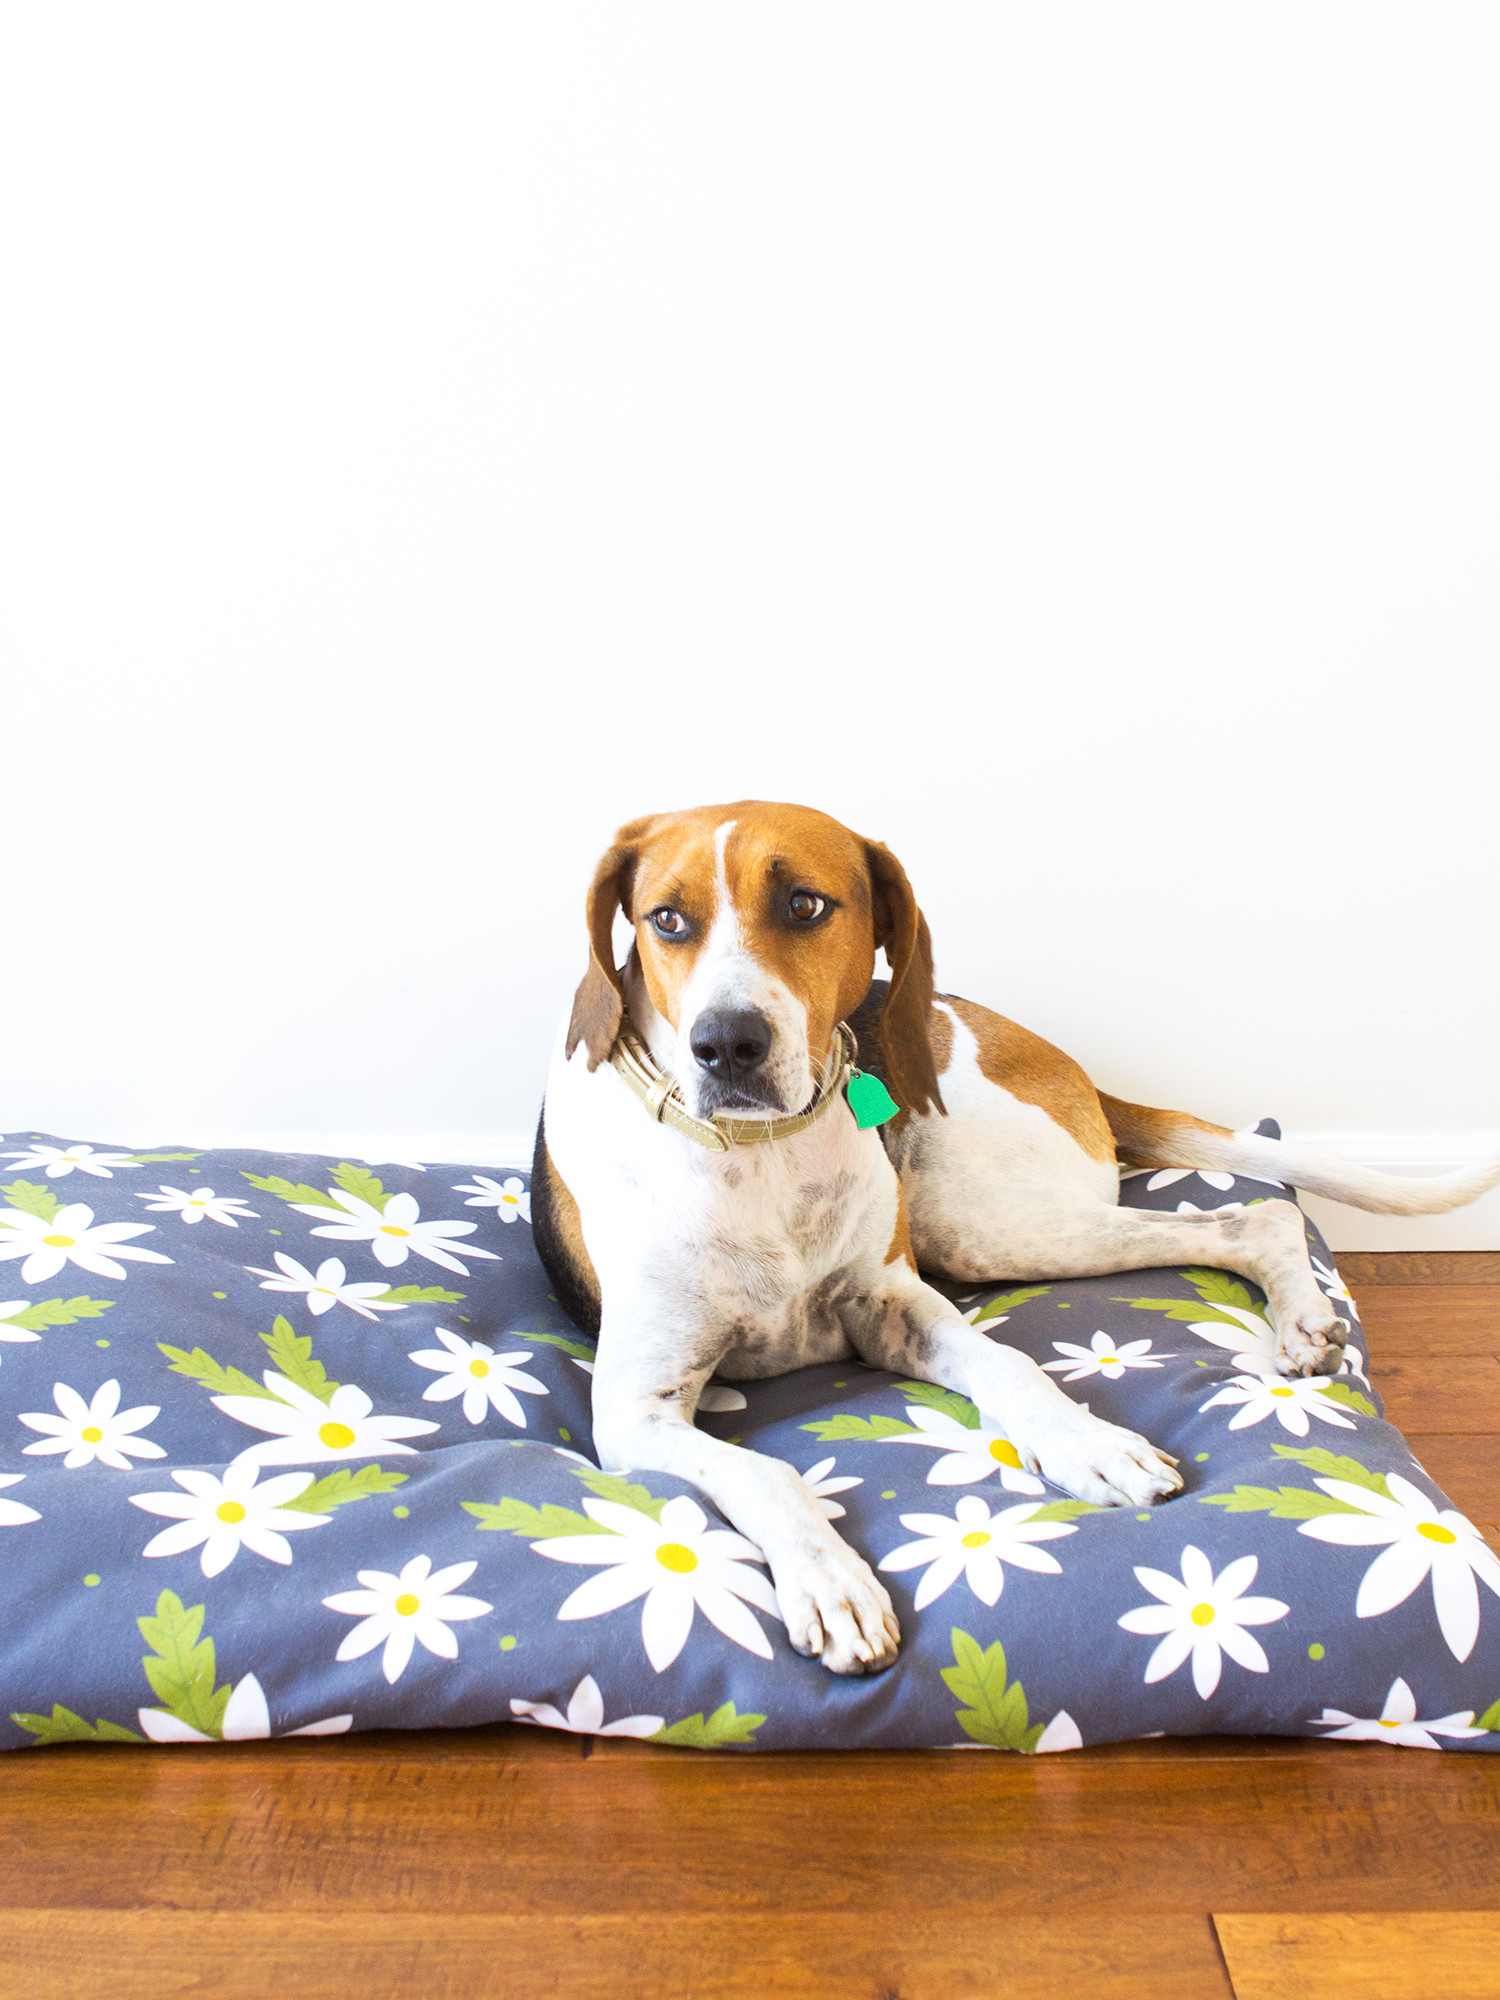 DIY Dog Bed Cover
 DIY Easy to Sew Zippered Dog Bed Cover Sarah Hearts